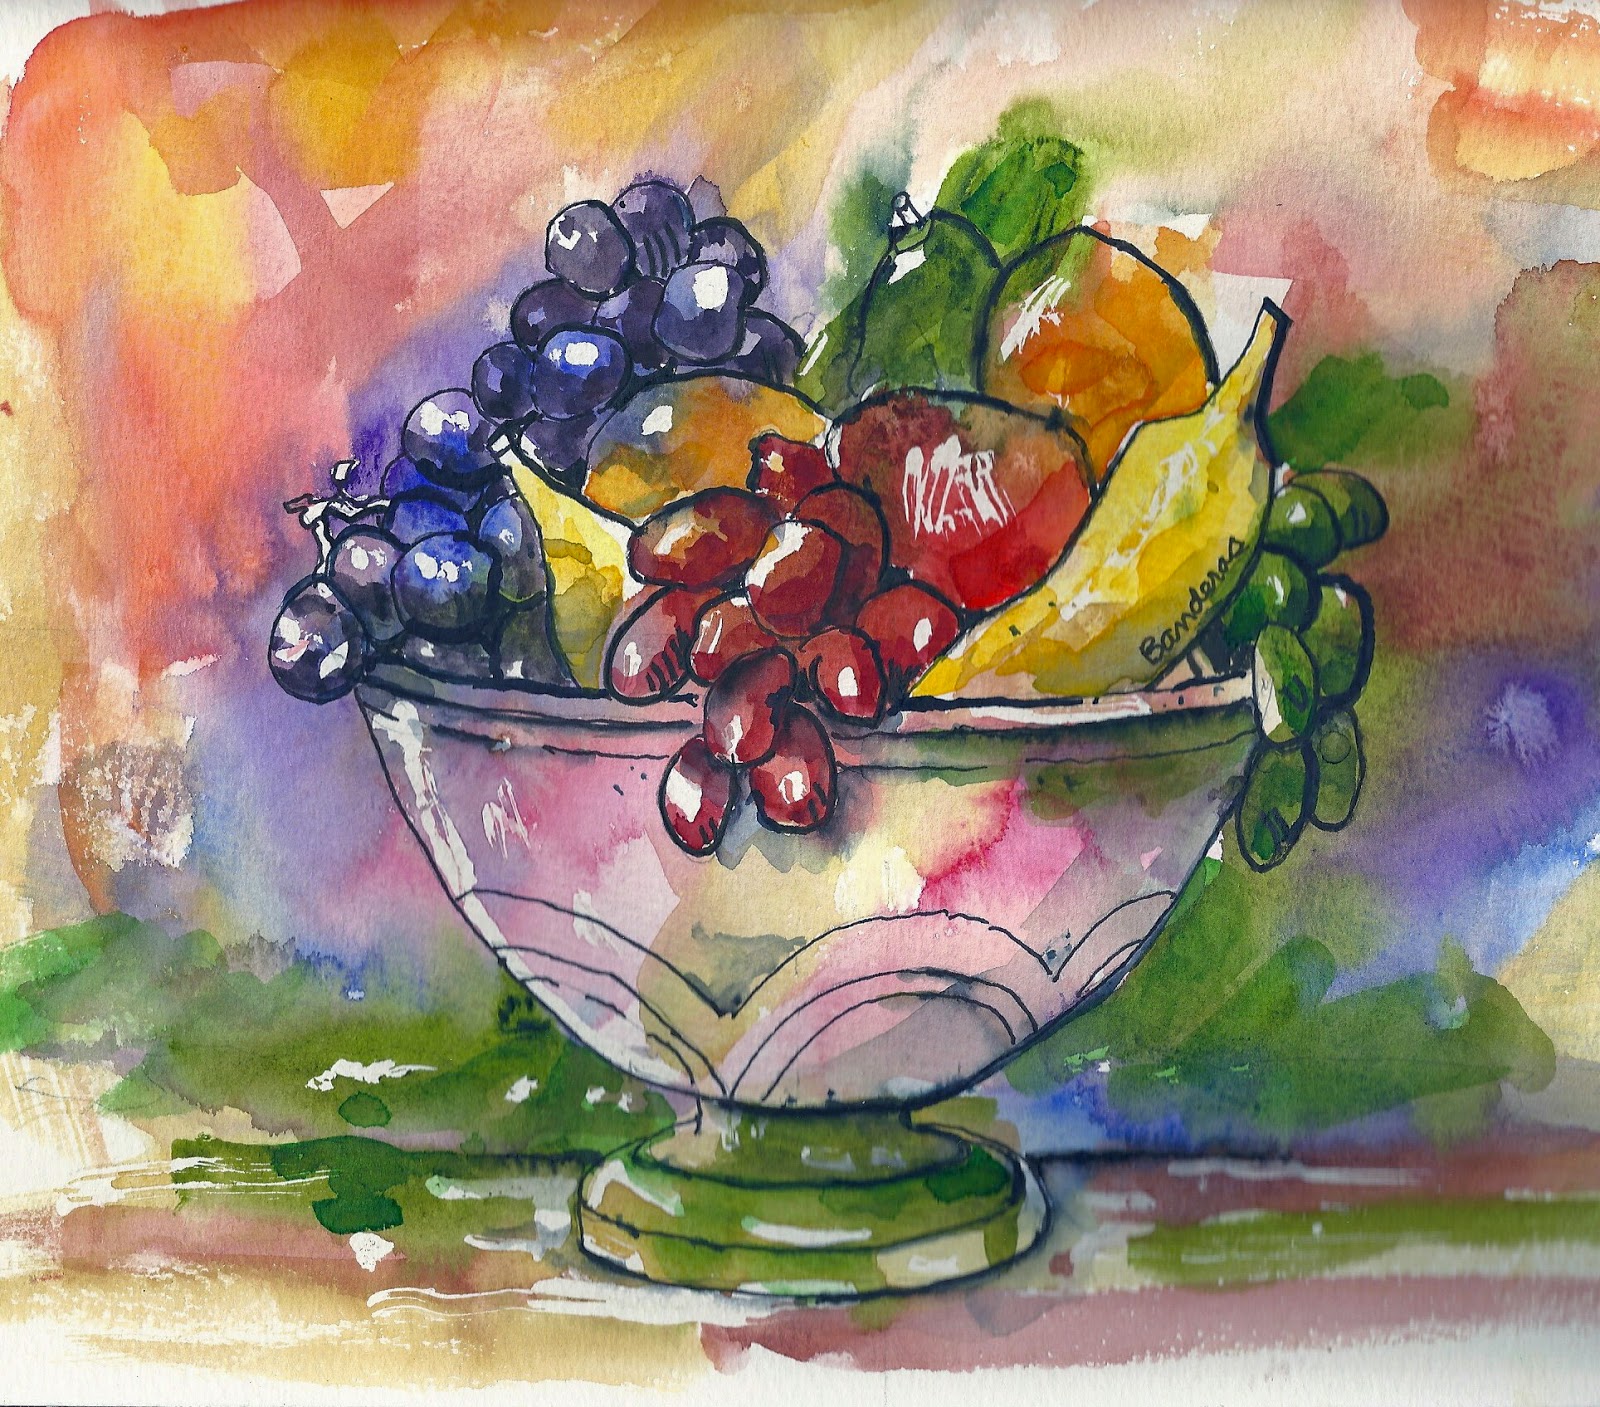 Terry's Ink and Watercolor: Fruit Bowl